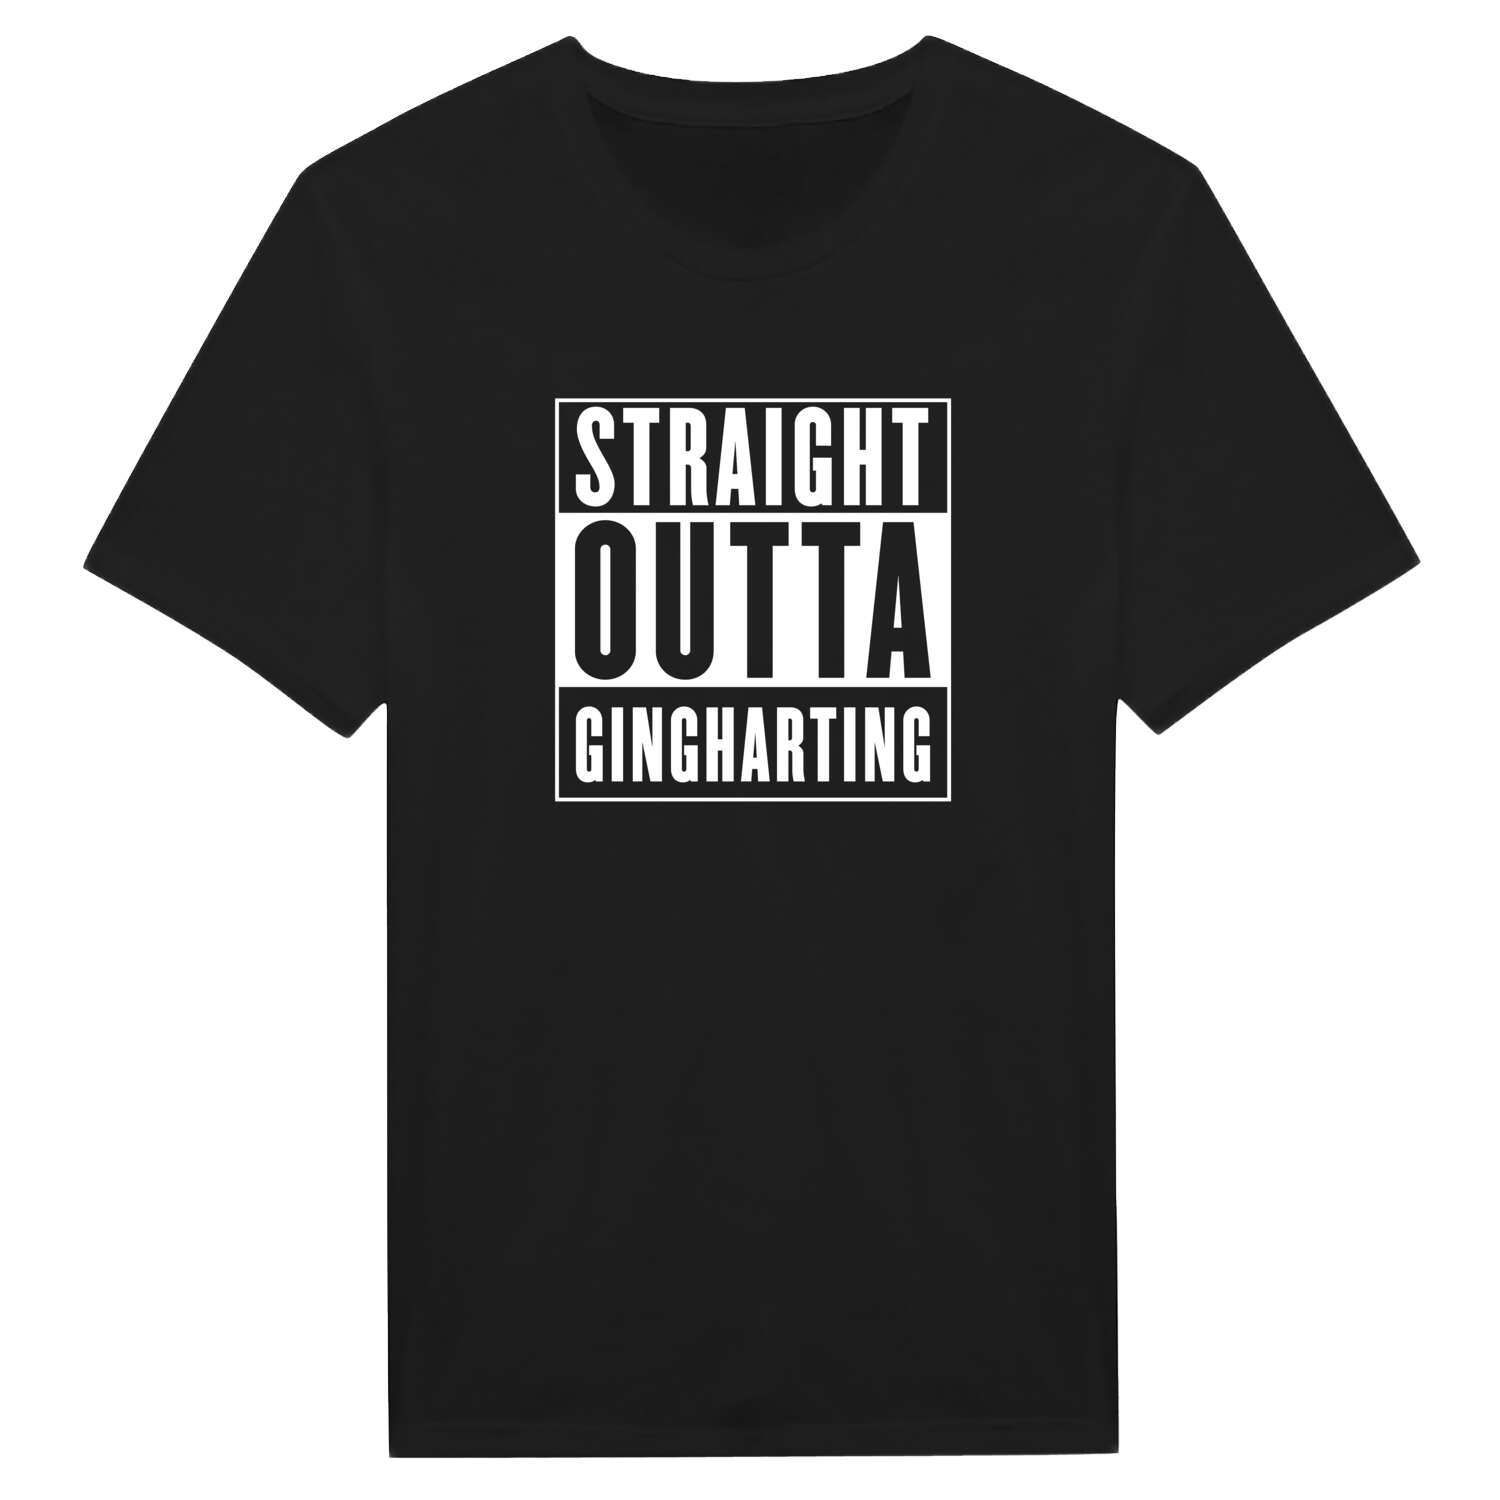 Gingharting T-Shirt »Straight Outta«